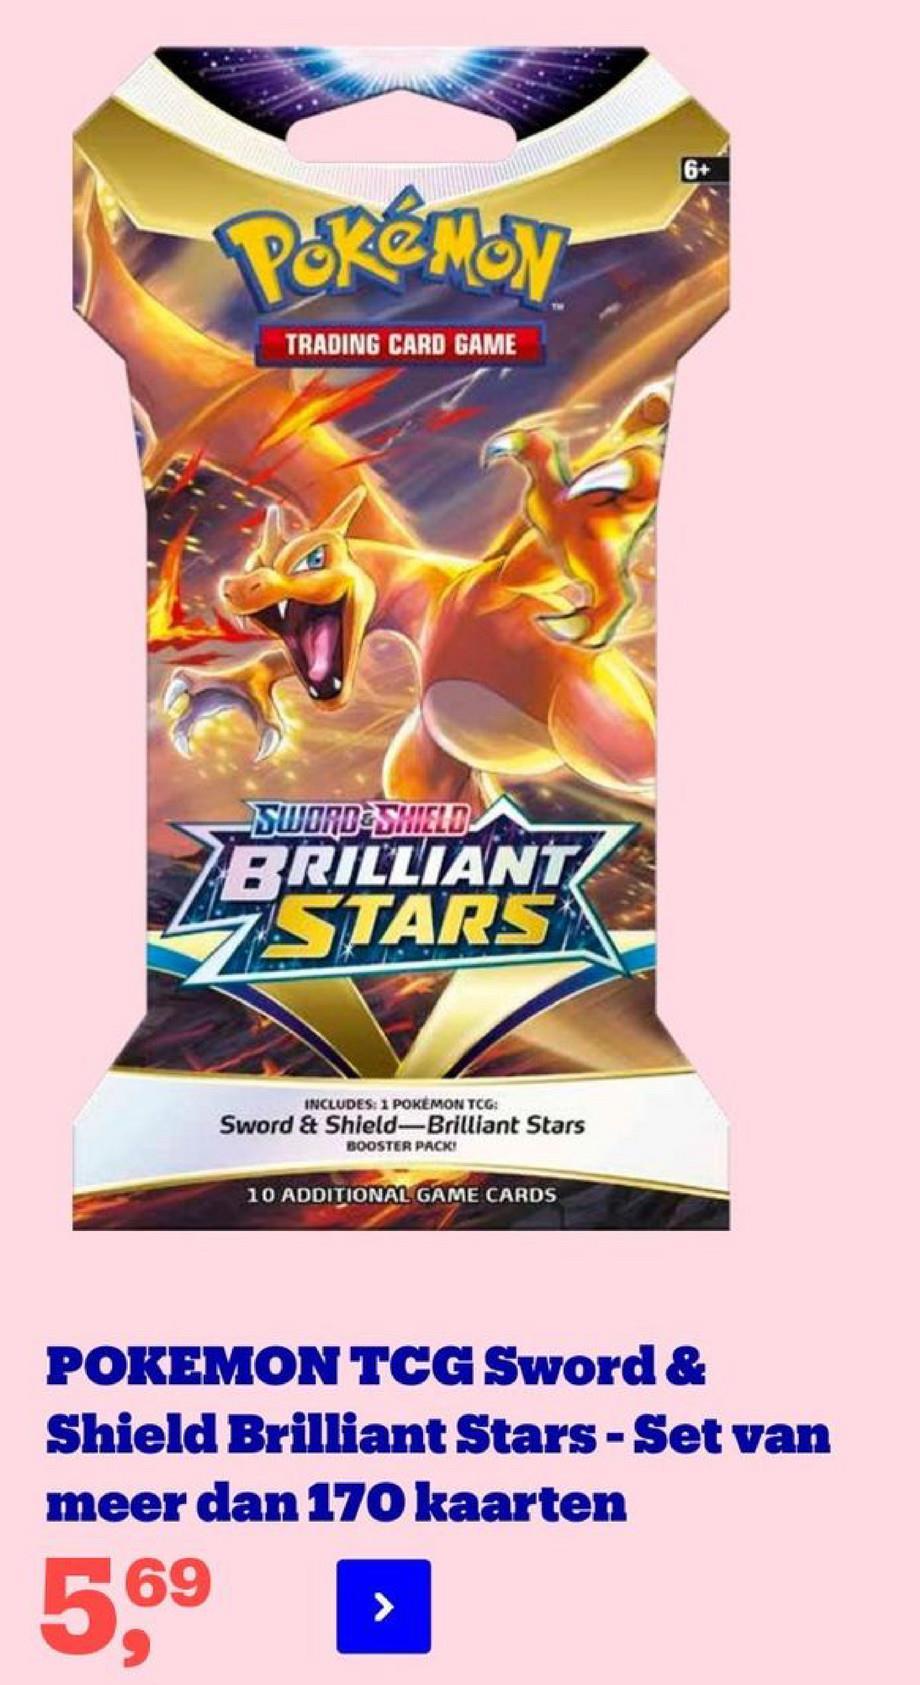 6+
Pokemon
TRADING CARD GAME
-SWORD-SHIELD
BRILLIANT
STARS
INCLUDES: 1 POKEMON TCG:
Sword & Shield-Brilliant Stars
BOOSTER PACK
10 ADDITIONAL GAME CARDS
POKEMON TCG Sword &
Shield Brilliant Stars - Set van
meer dan 170 kaarten
5,69
>
